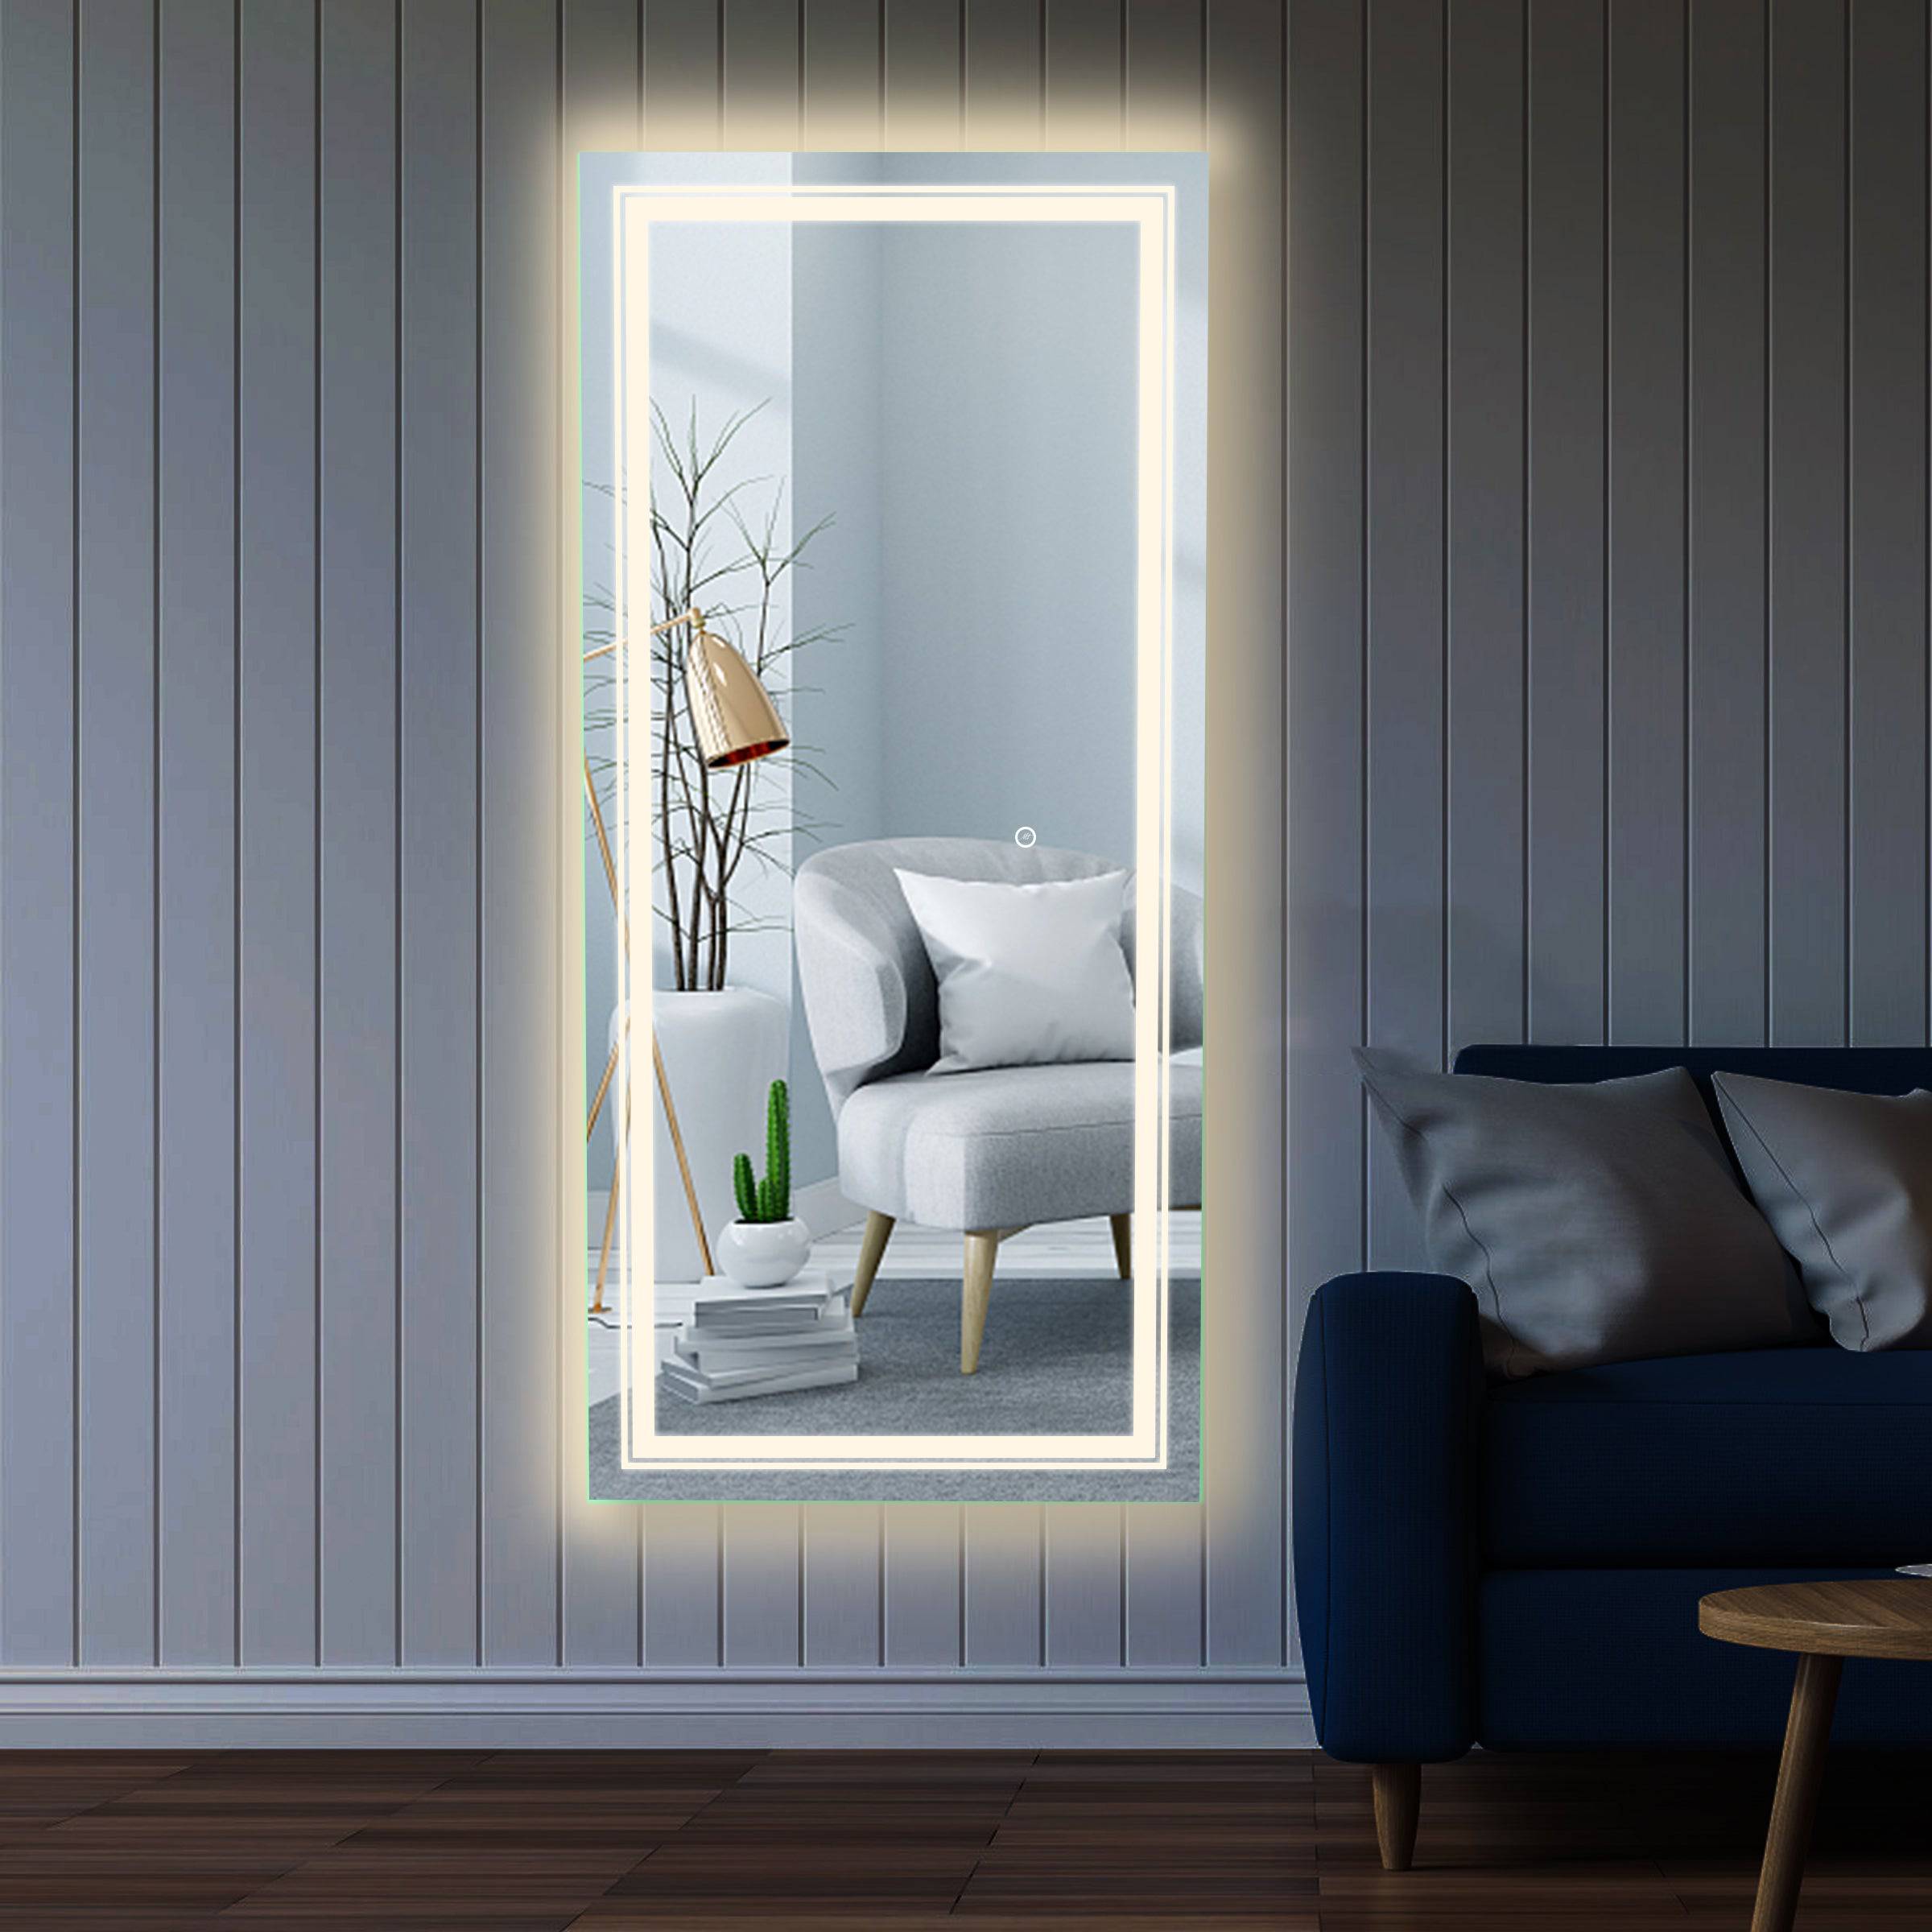 Upgrade Your Bathroom with a Stunning 22x48 Inch LED Dressing Mirror - Inset Frosting, Glow Lighting, Touch Switch, and Adjustable Color Temperature for the Perfect Ambiance - Eco LED Lightings 